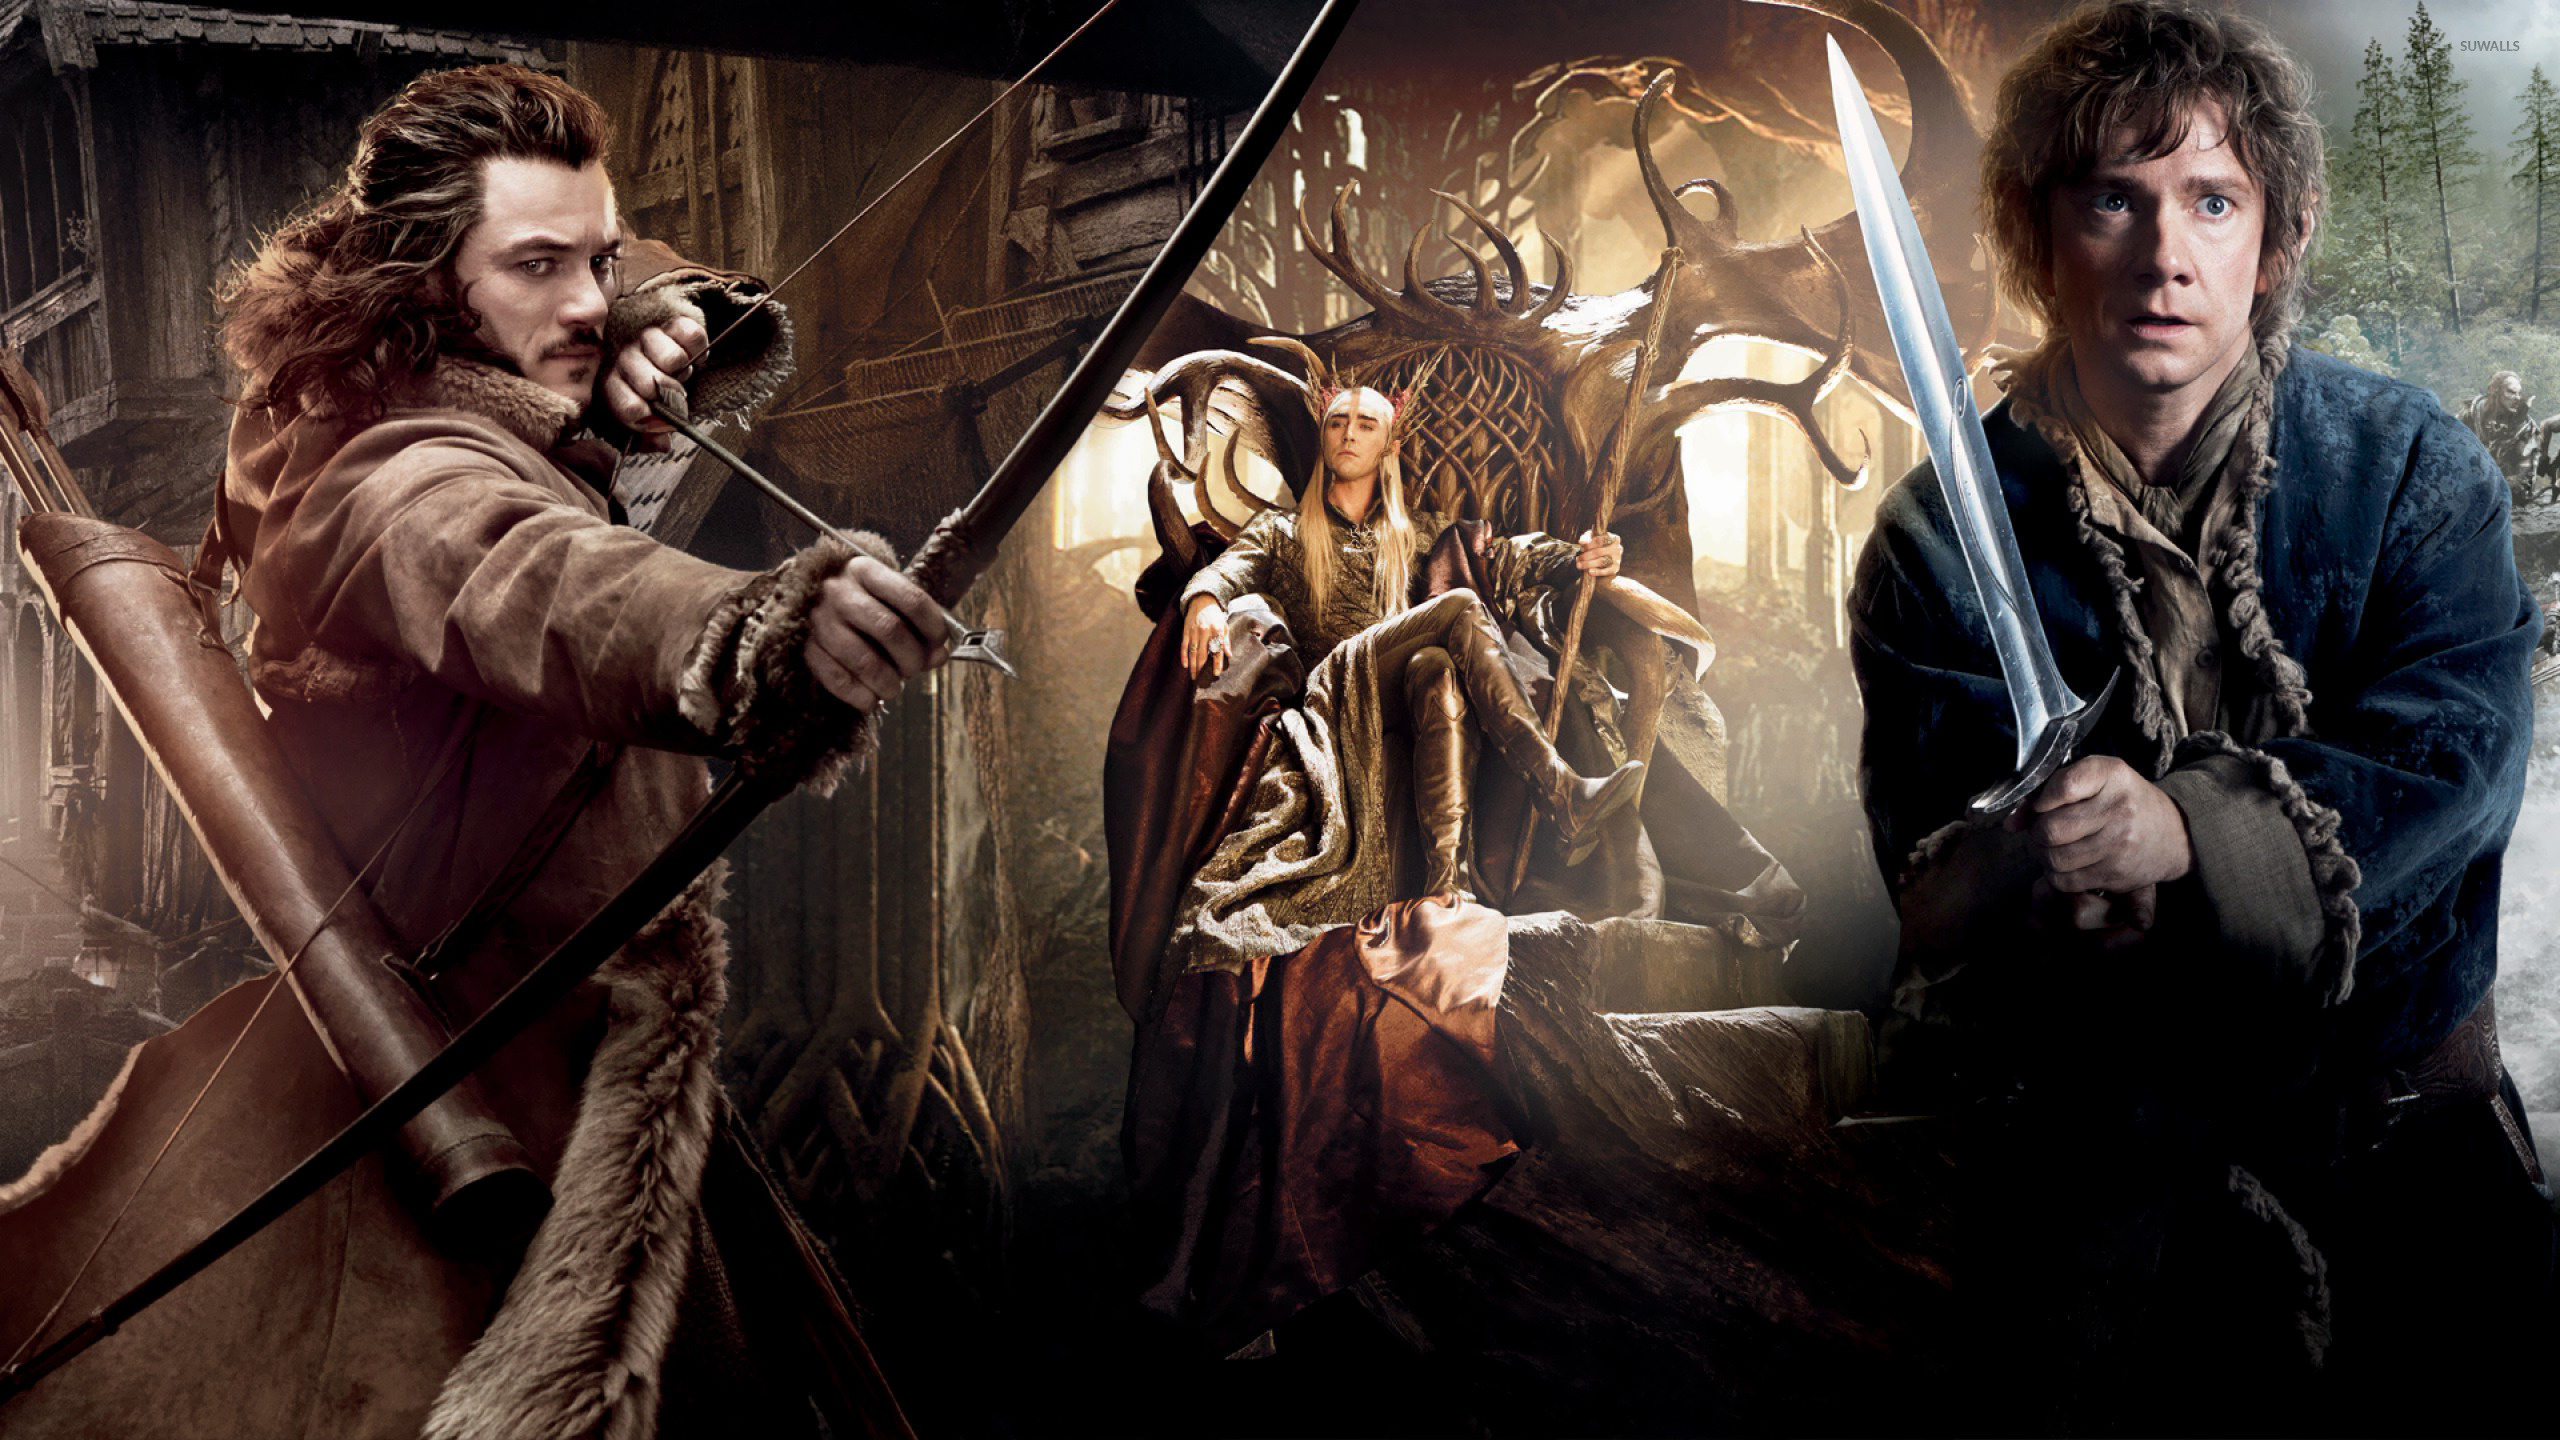 The Hobbit (Movie): Bard the Bowman, a Man of Lake-town, the slayer of the dragon Smaug, Bilbo. 2560x1440 HD Background.